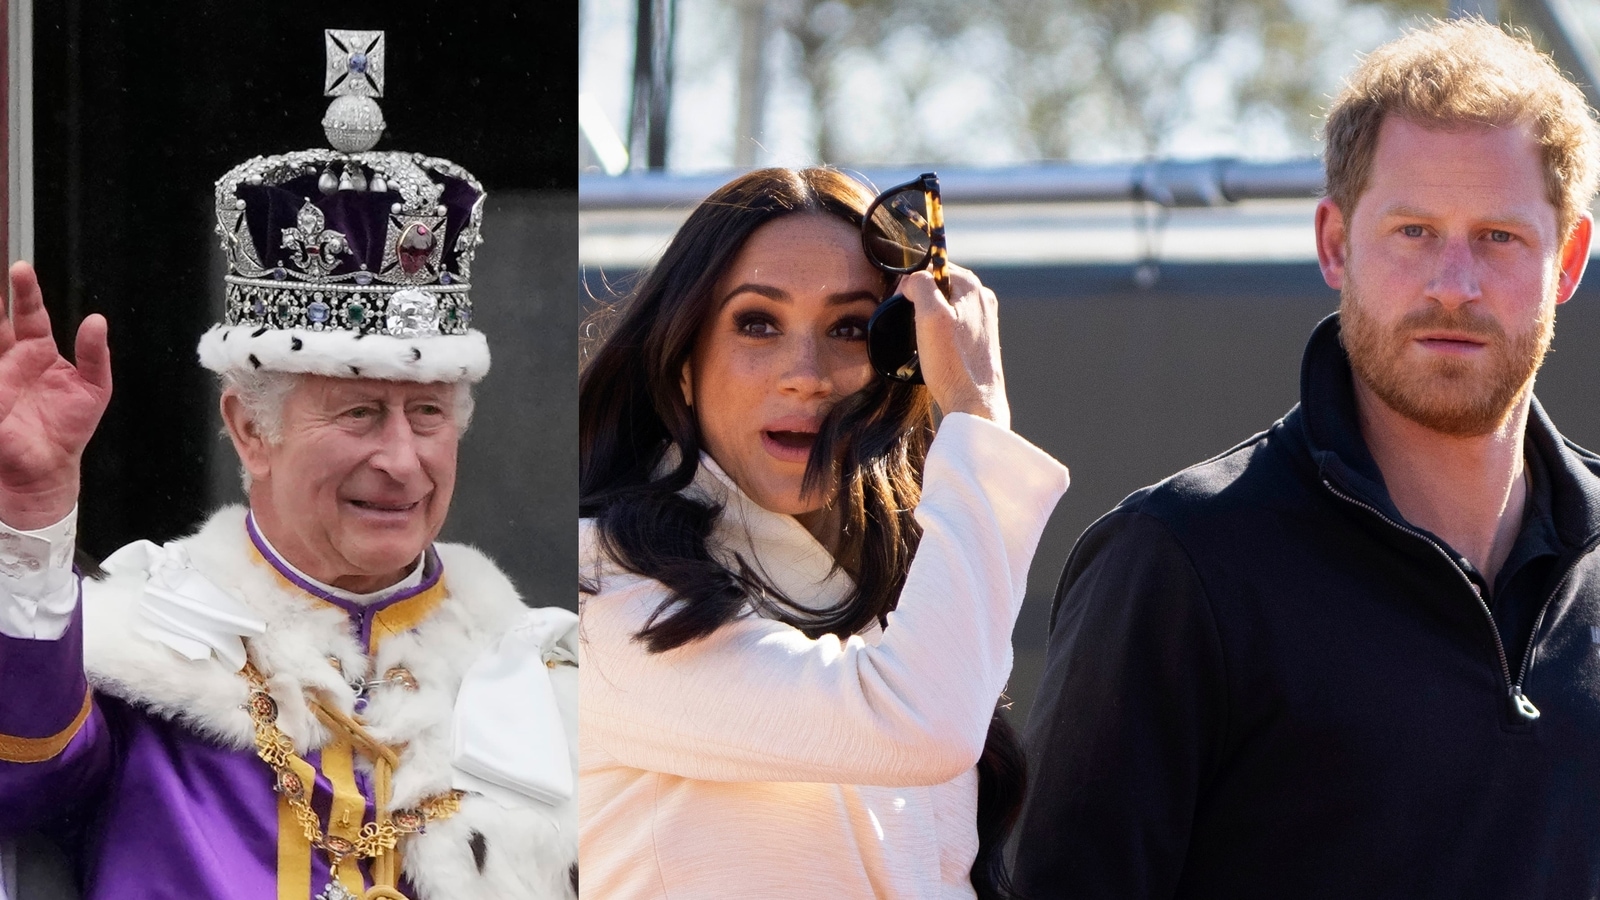 Meghan Markle would be delighted if King Charles approved her new plans; hopes Harry will come forward